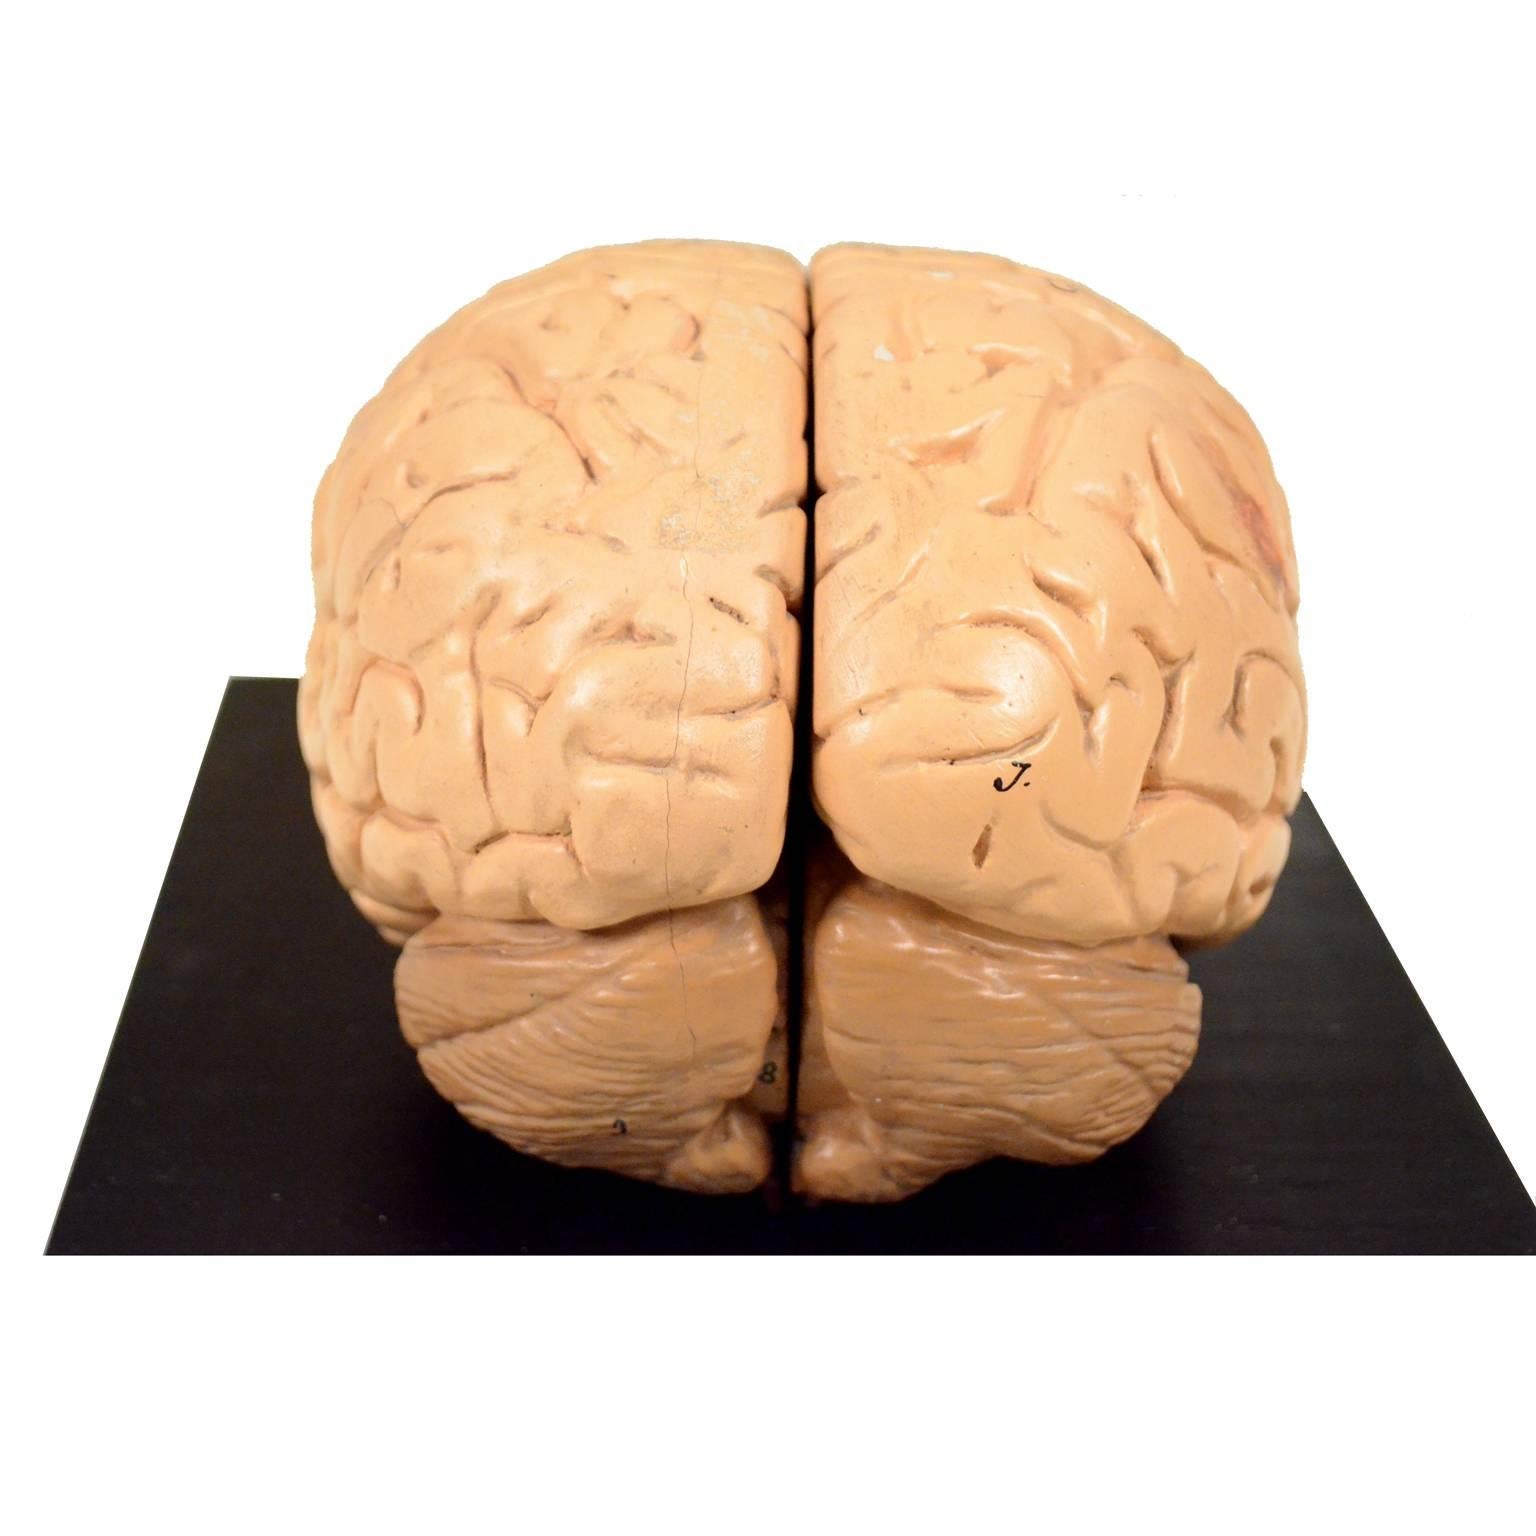 Czech Didactic Model of Human Brain of the Early 1930s For Sale